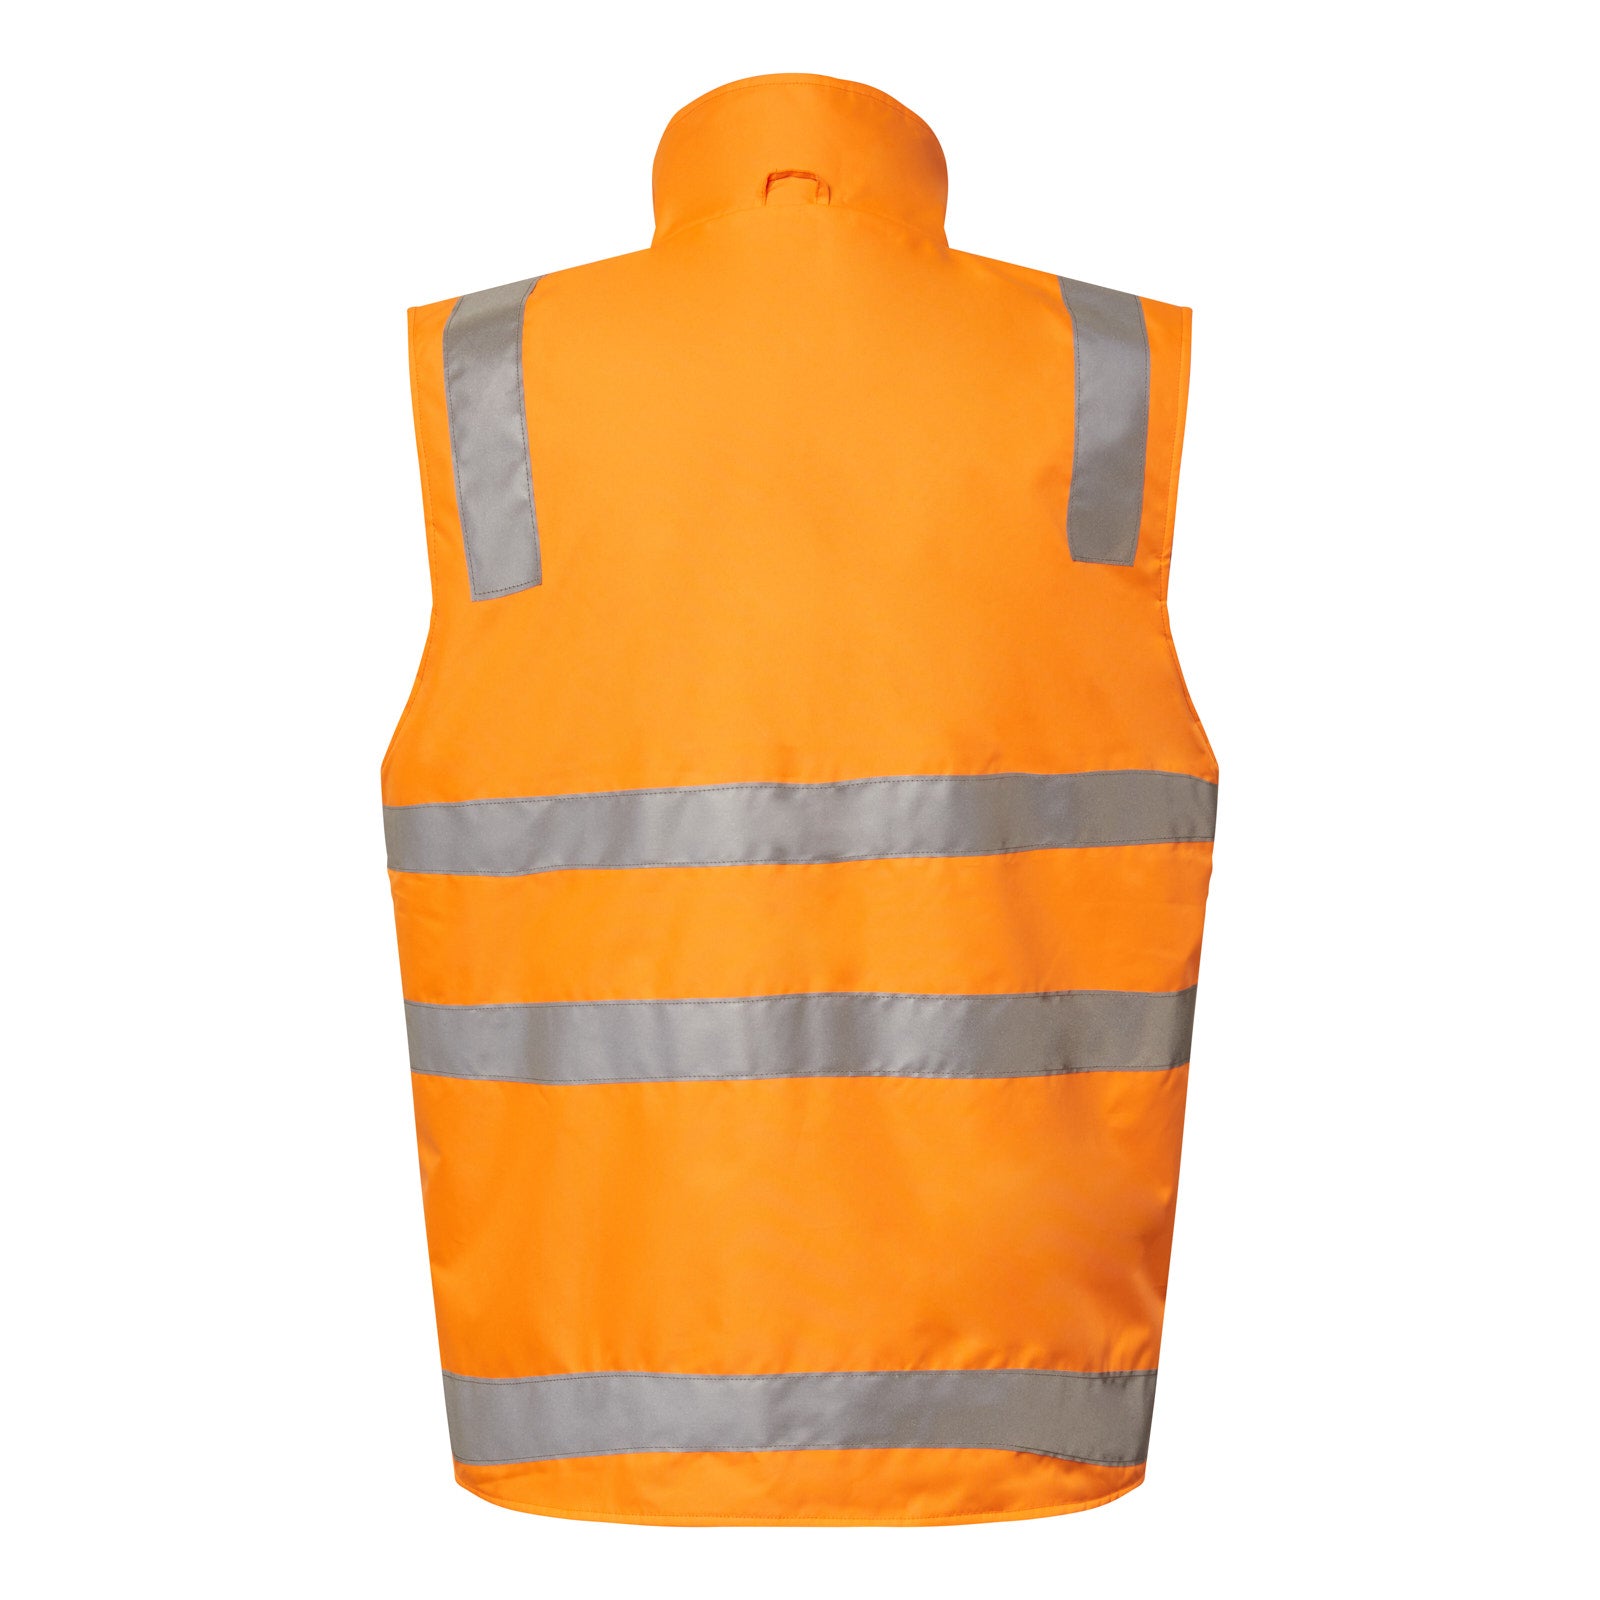 VIC Rail Vest With Tape - made by Workcraft